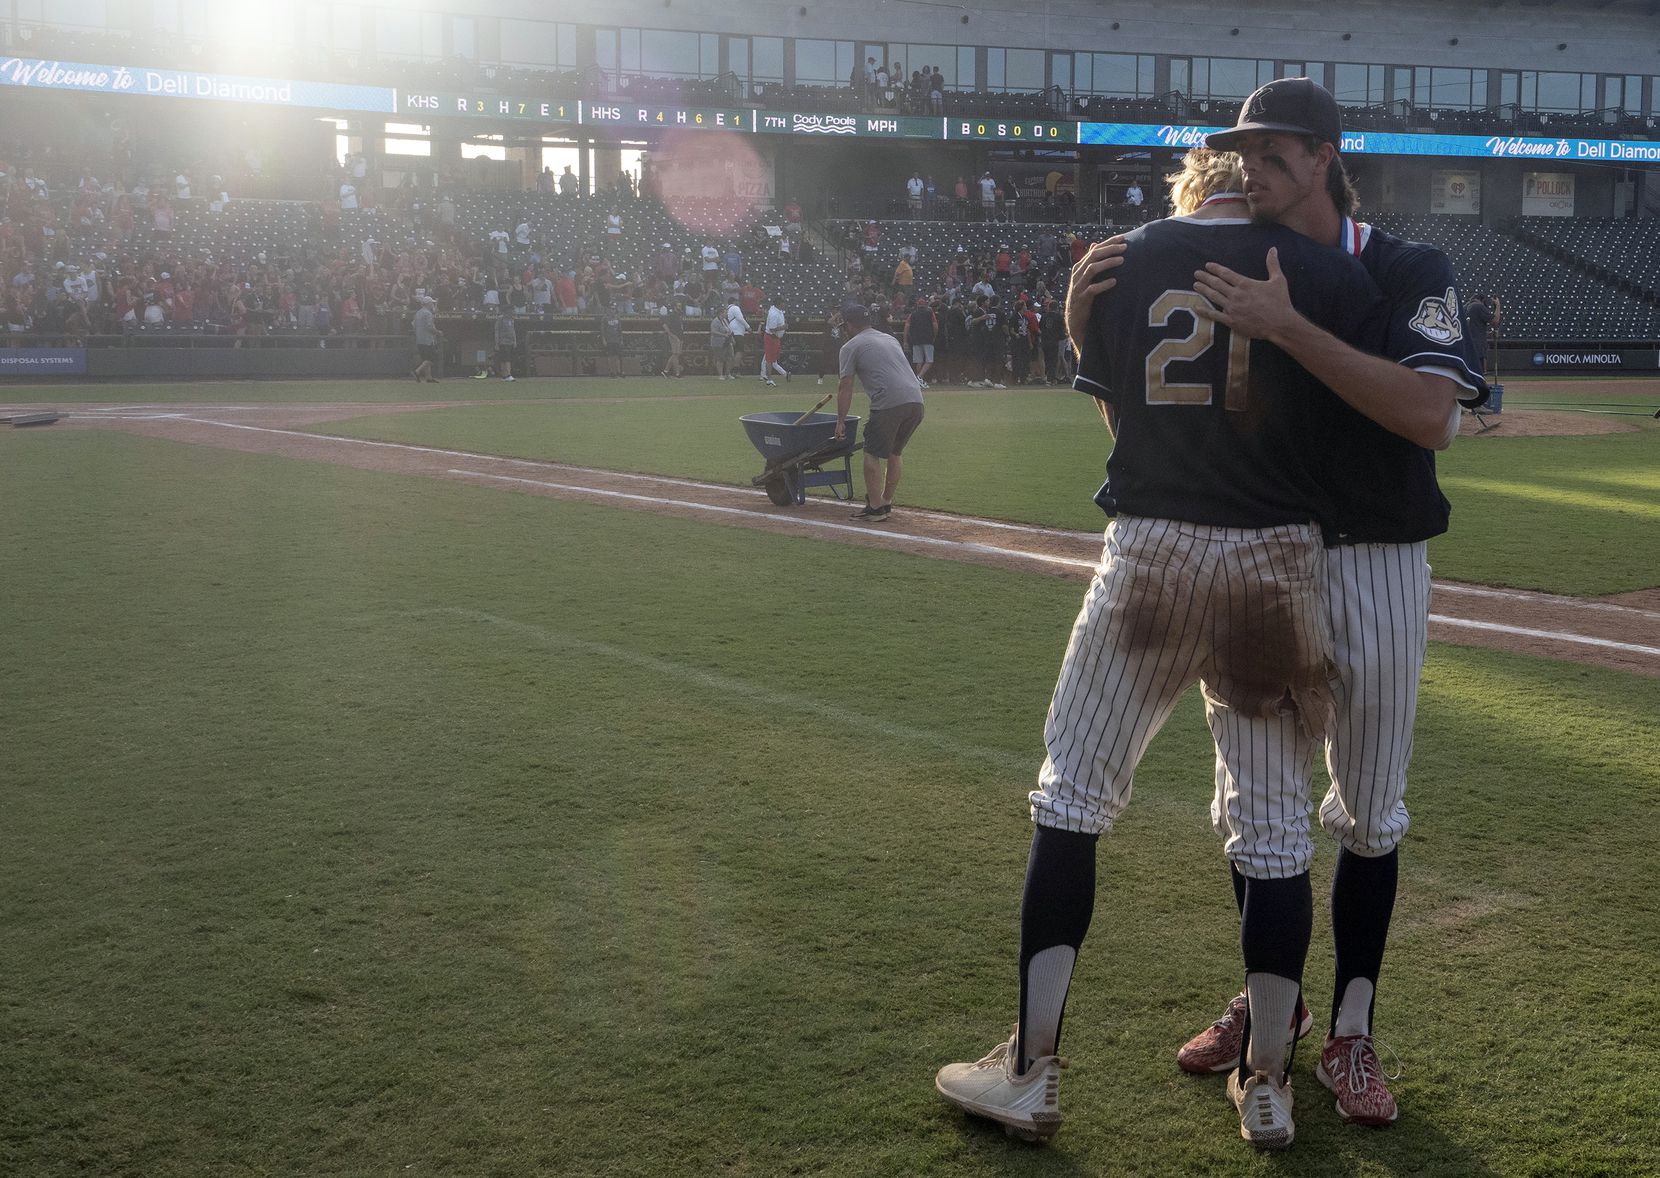 Keller Eric Hammond, (27),  gives teammate, Zach Rike, (21), a hug after coming up short against Rockwall-Heath during the 2021 UIL 6A state baseball final held, Saturday, June 12, 2021, in Round Rock, Texas.  Rockwall-Heath defeated Keller 4-3.   (Rodolfo Gonzalez/Special Contributor) 